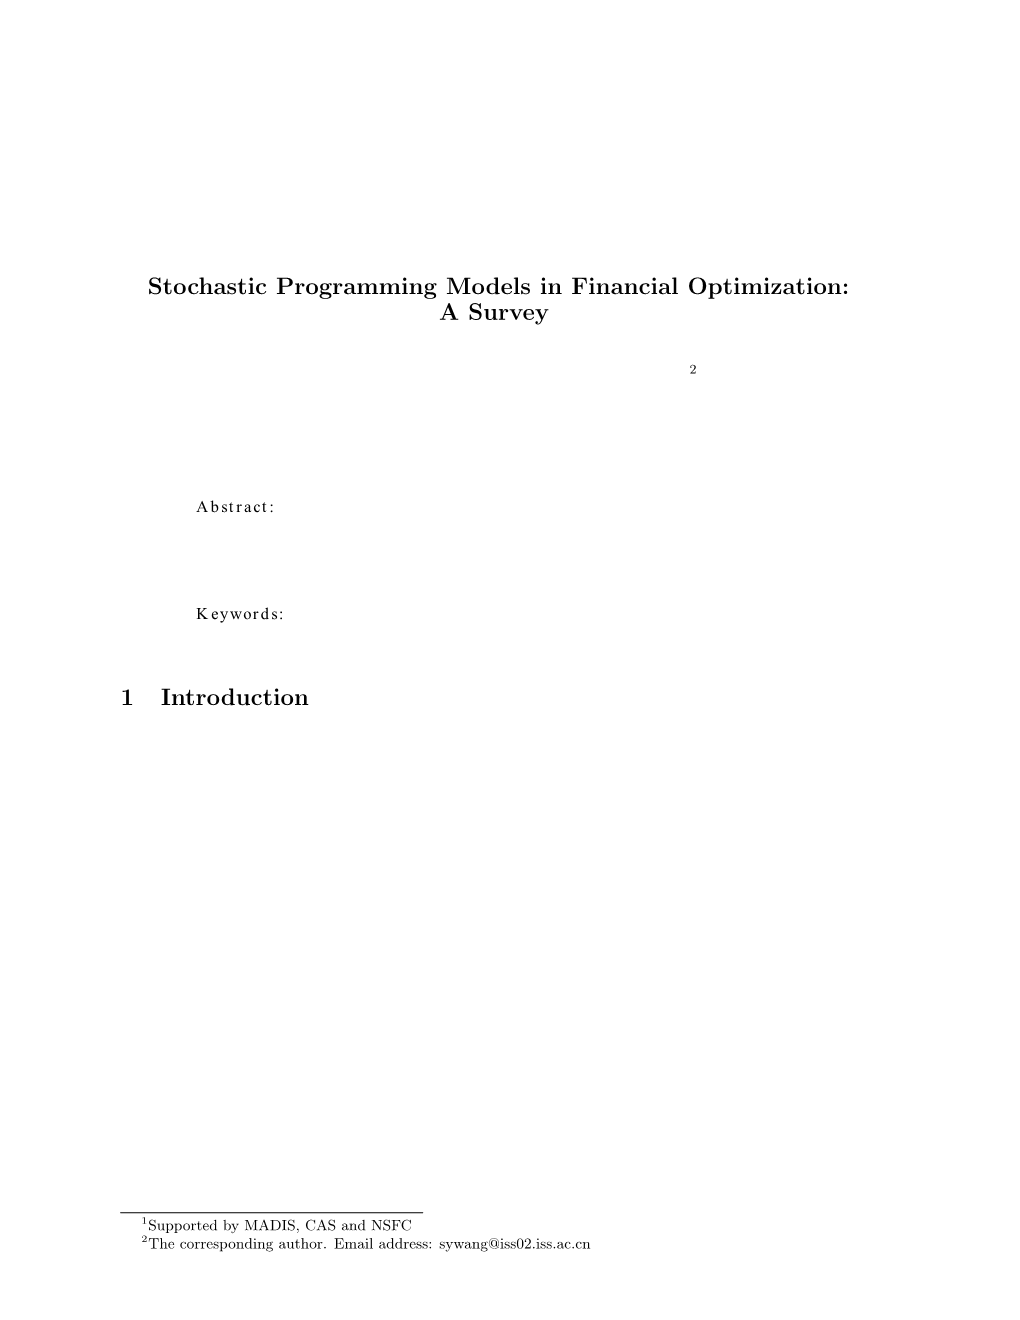 Stochastic Programming Models in Financial Optimization: a Survey1